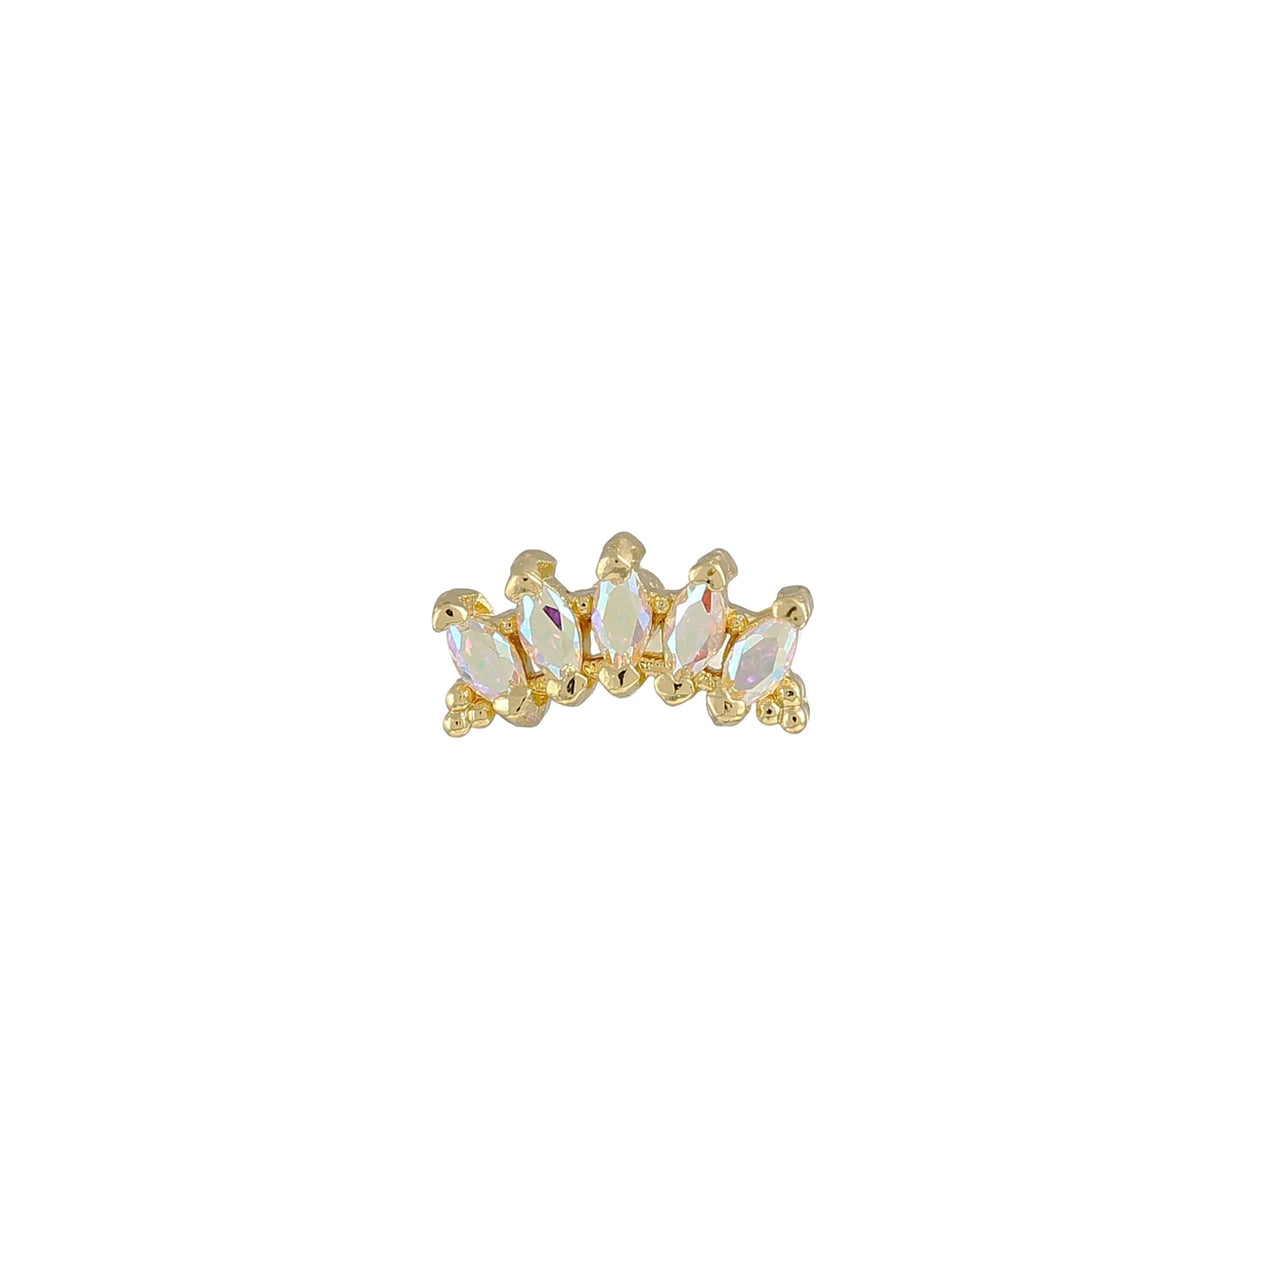 The Crown Cartilage Single Earring